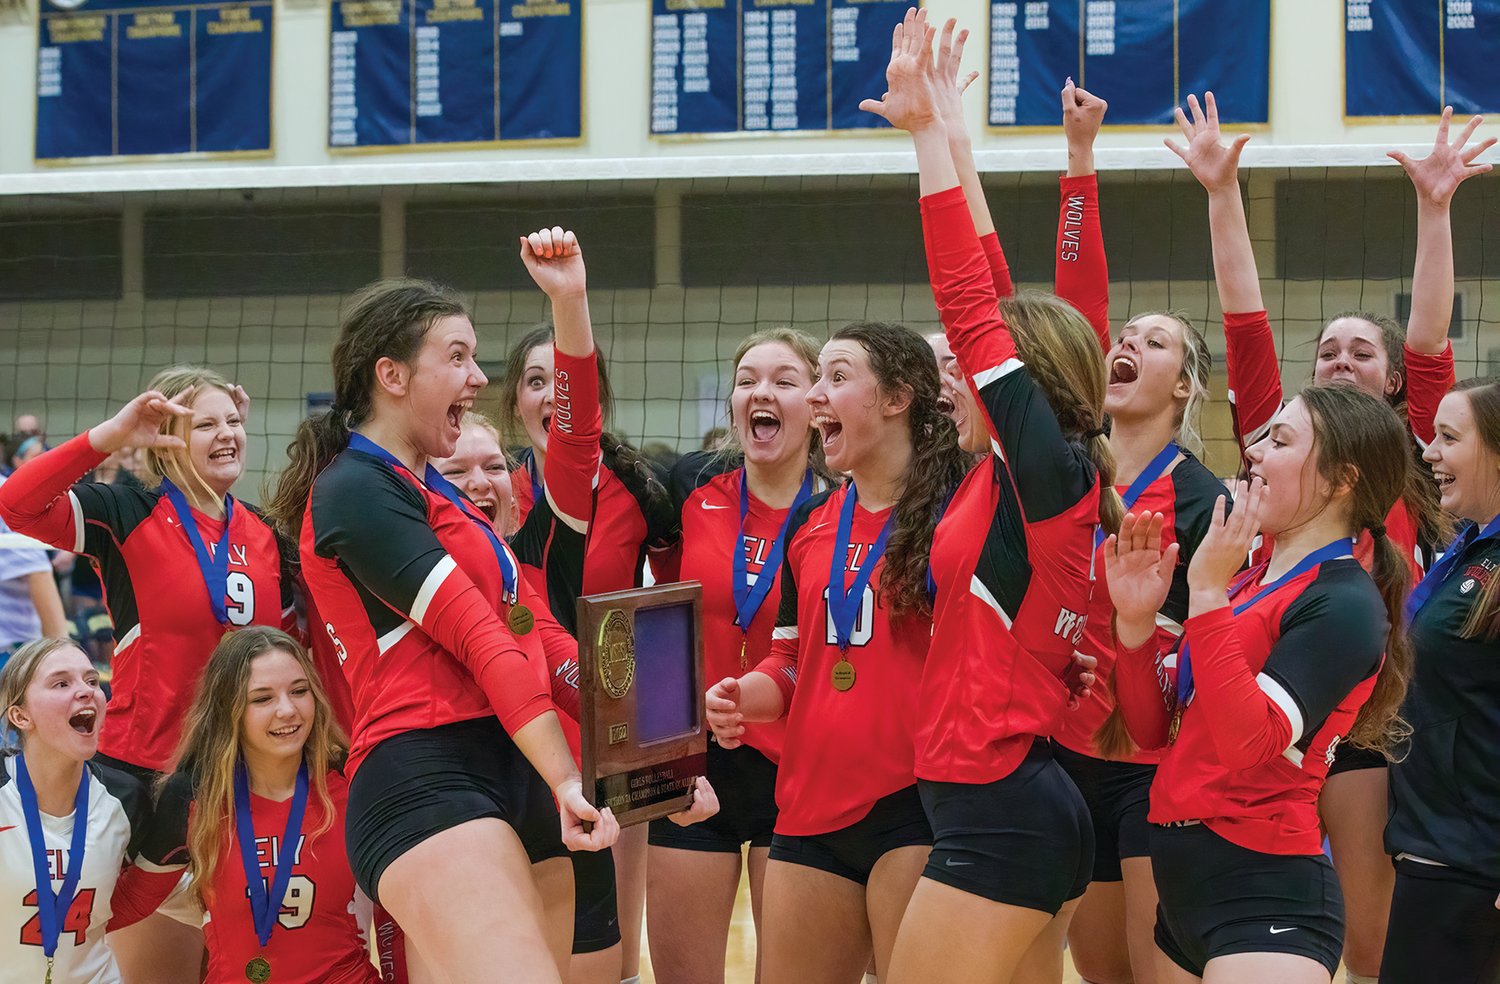 Members of the Ely volleyball team express their joy after winning the Section 7A title.